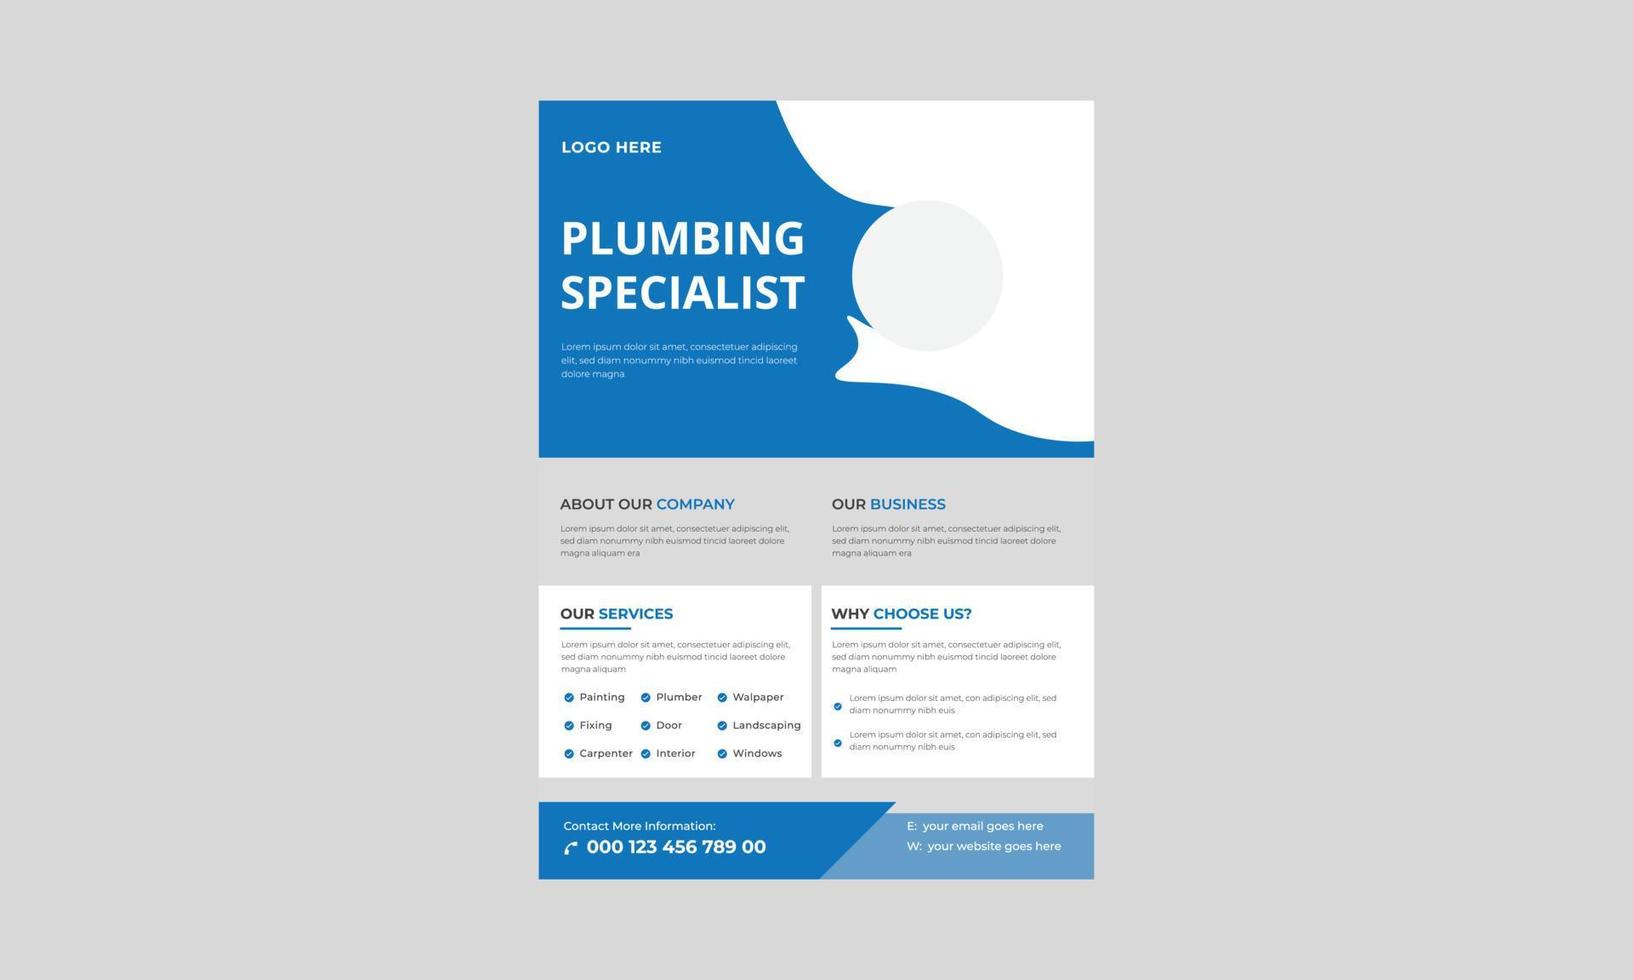 Need A Plumbing Services, Plumber Service Flyer Template, Handyman, plumber flyer design for company, Plumbing service flyer poster design. vector